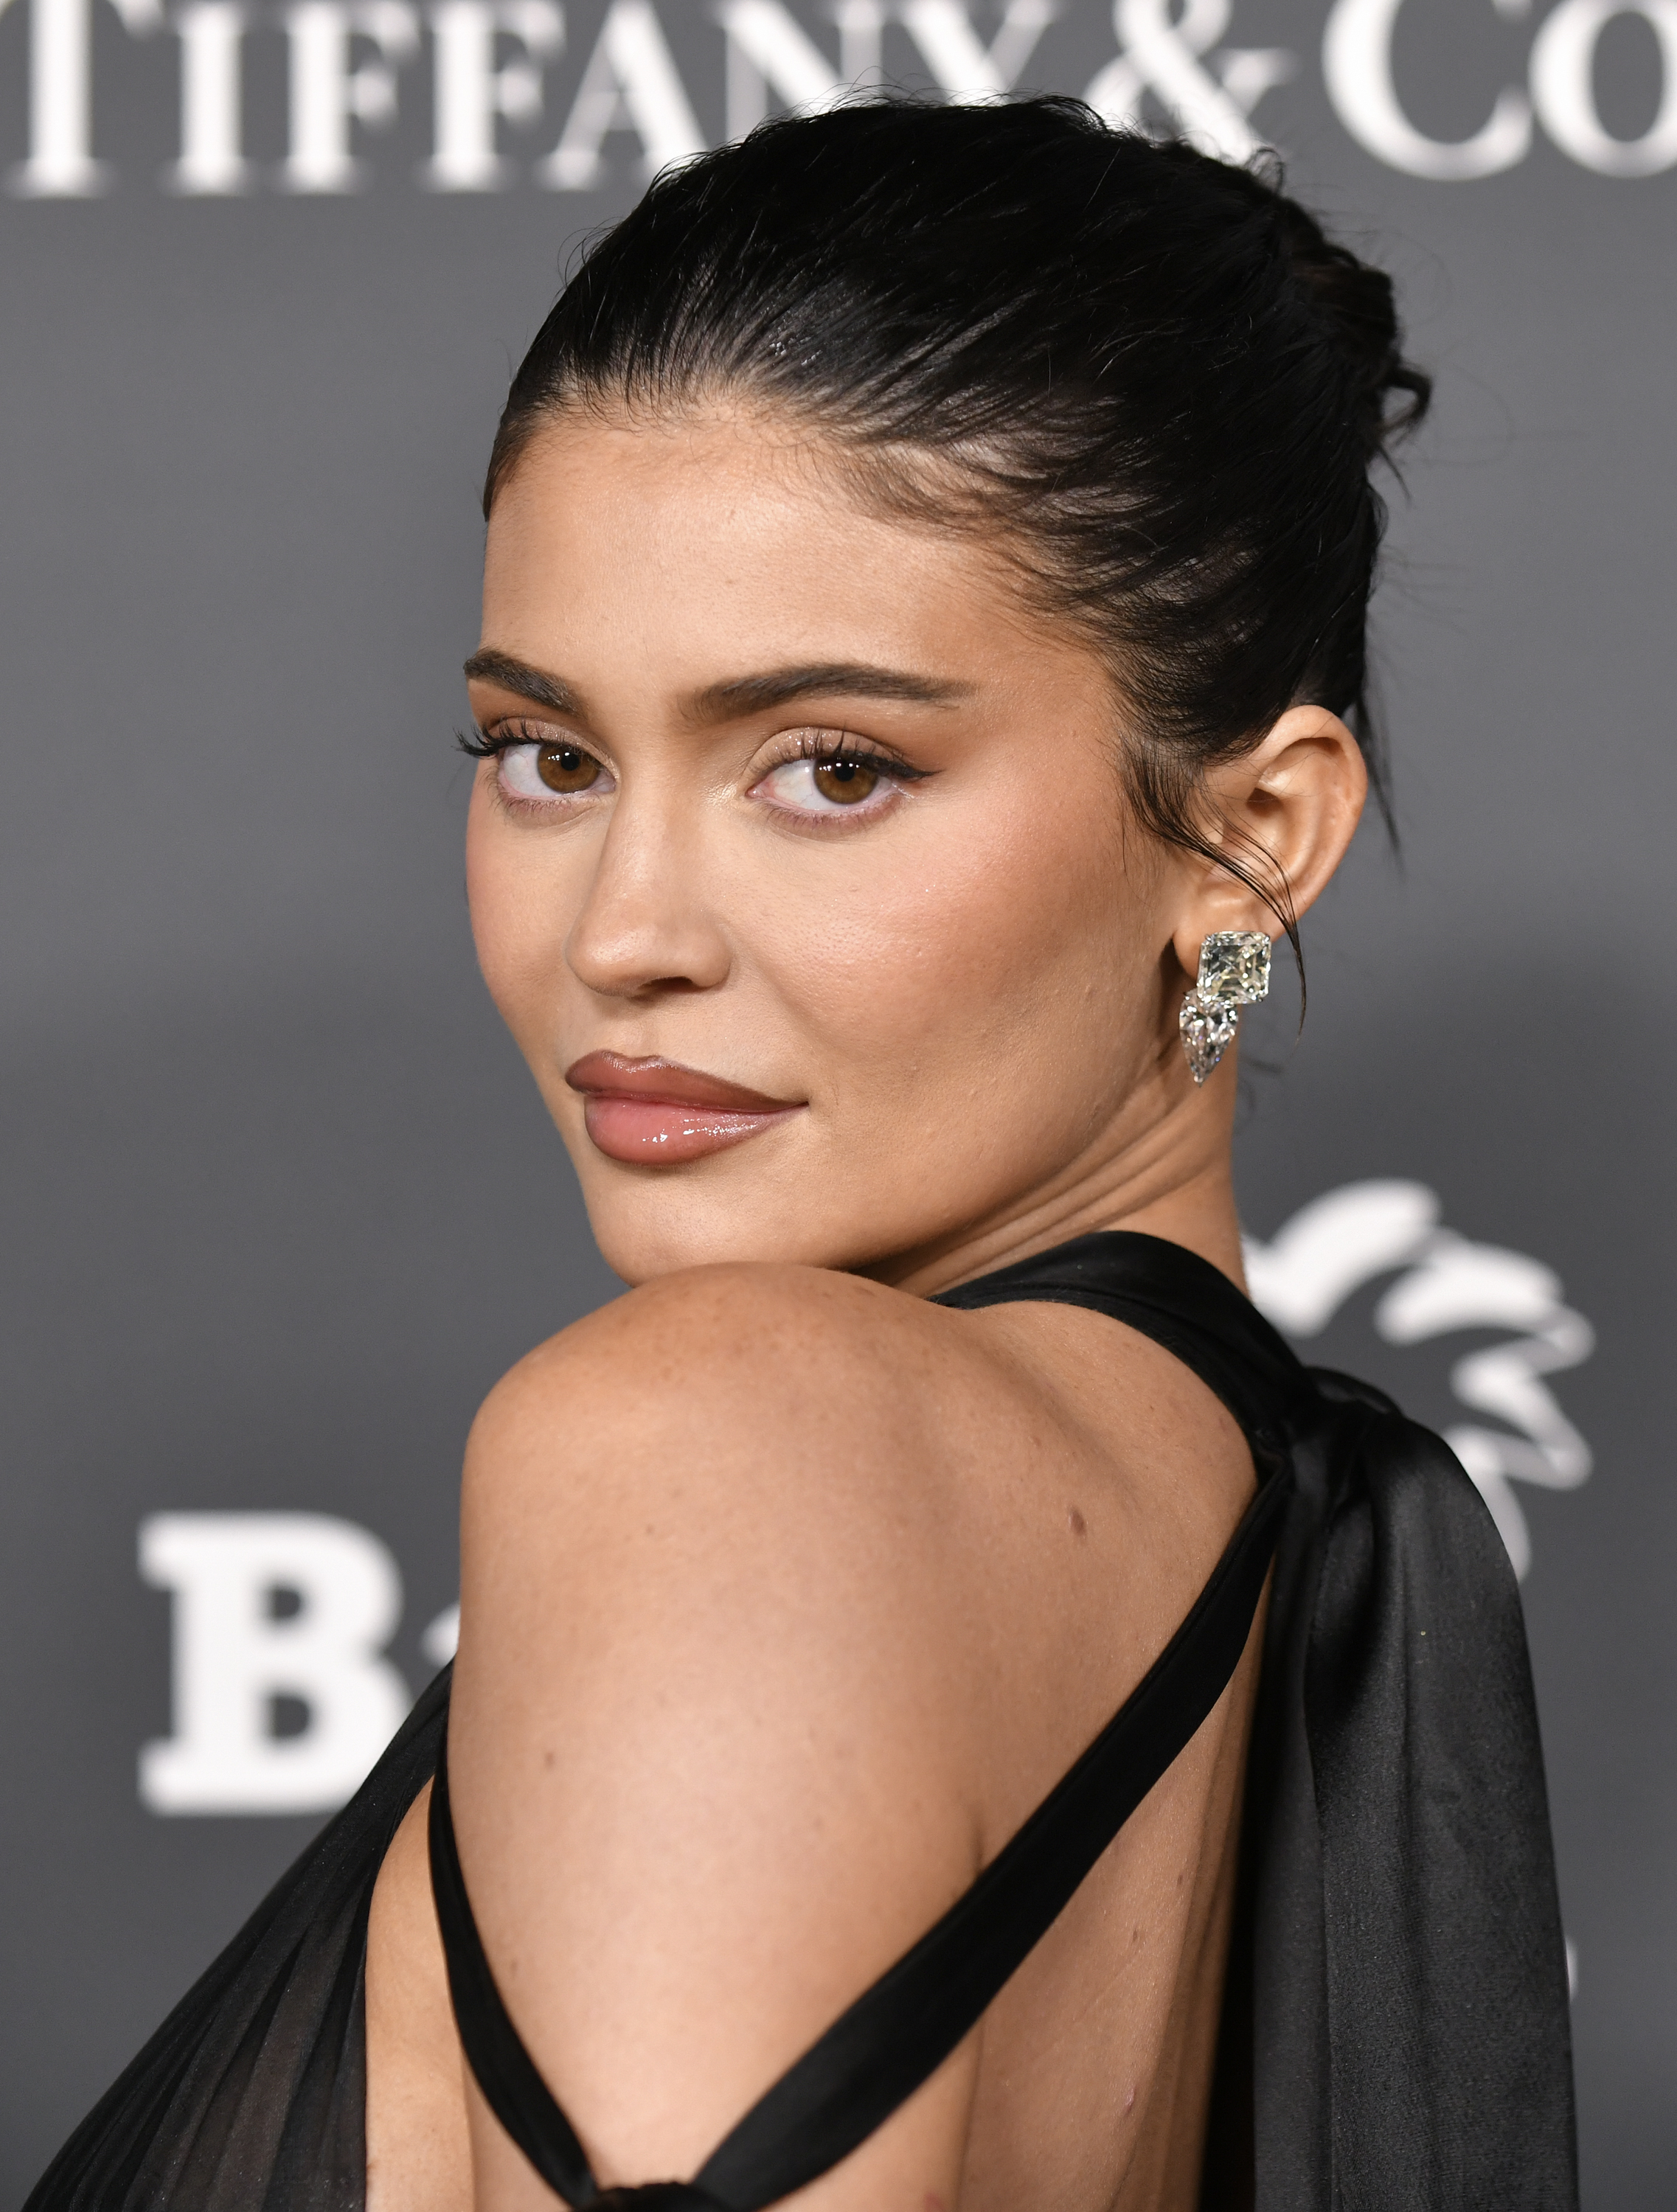 Close-up of Kylie at a media event